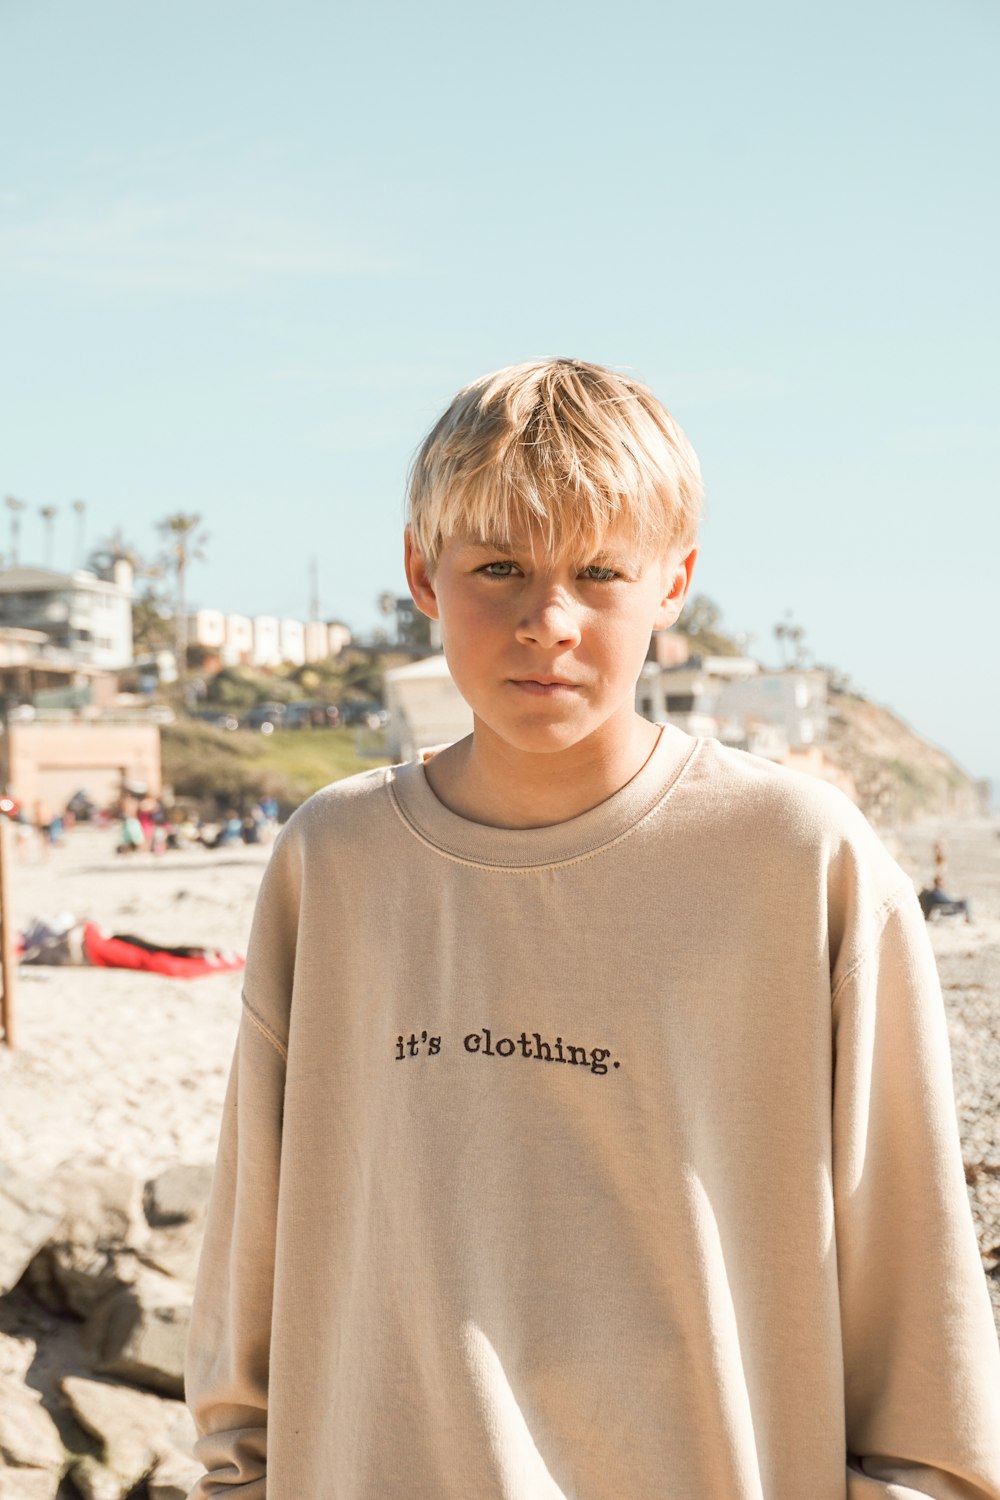 boy in white crew neck shirt standing on brown sand during daytime